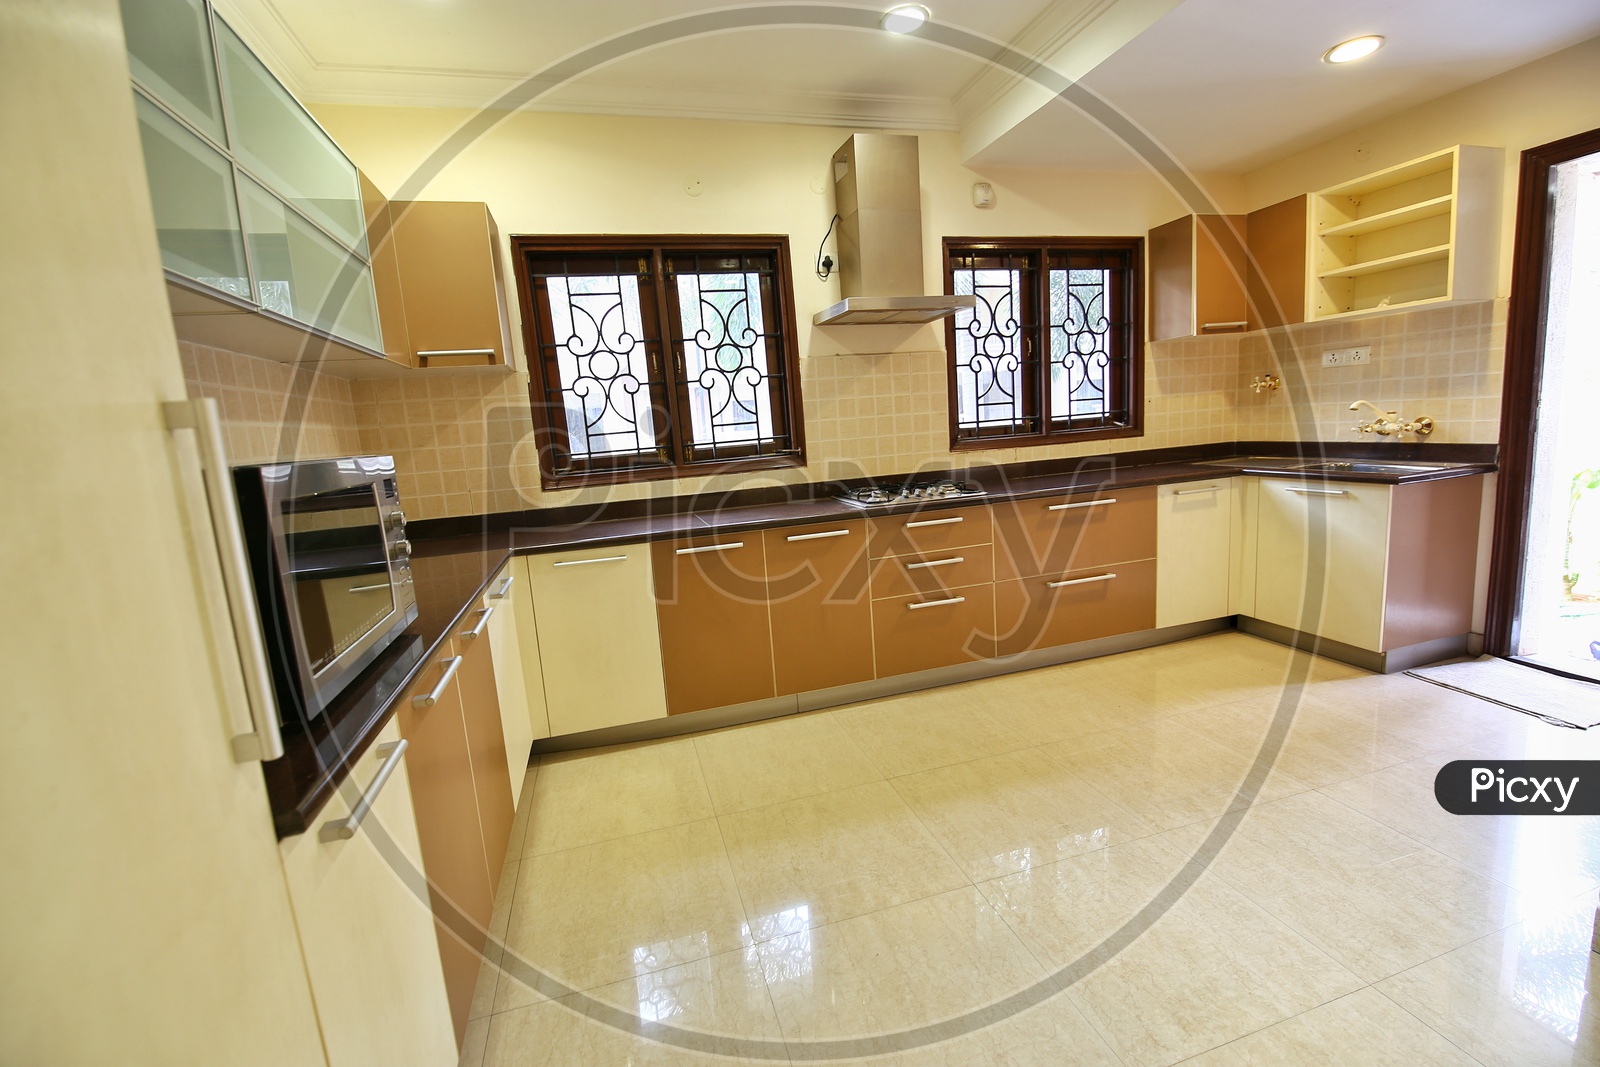 Kitchen Interior Of in an Residential House